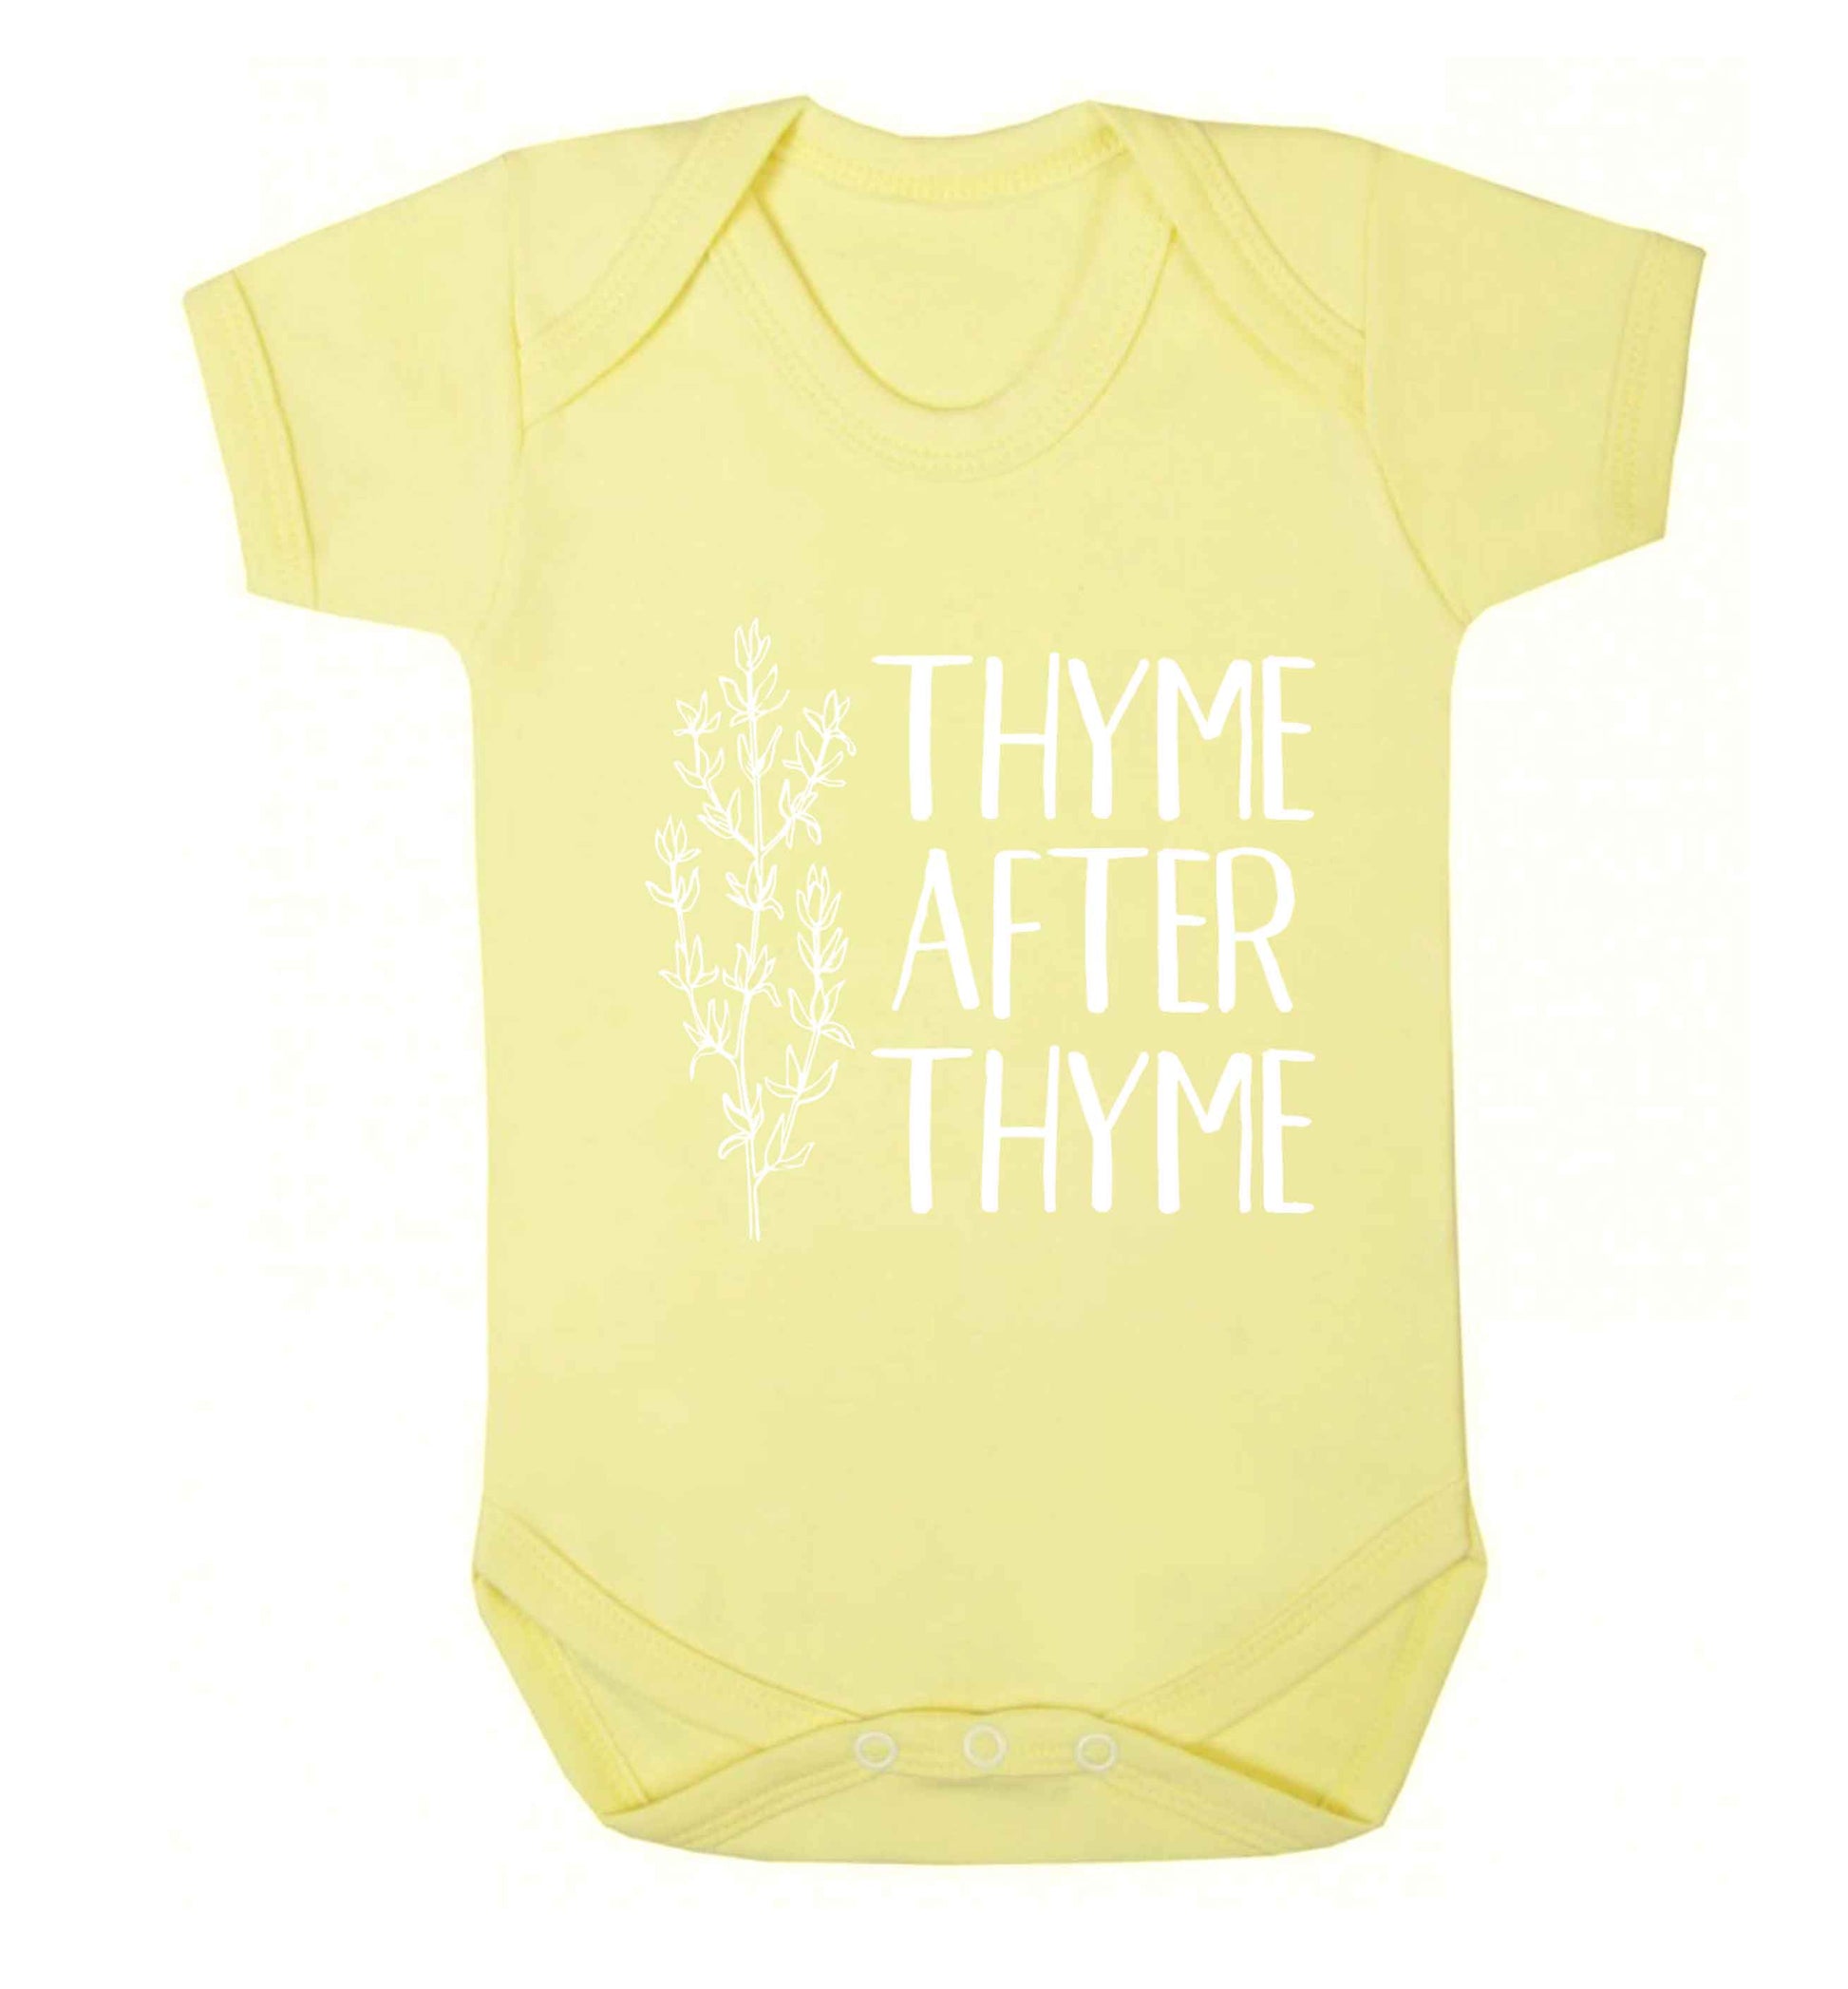 Thyme after thyme Baby Vest pale yellow 18-24 months